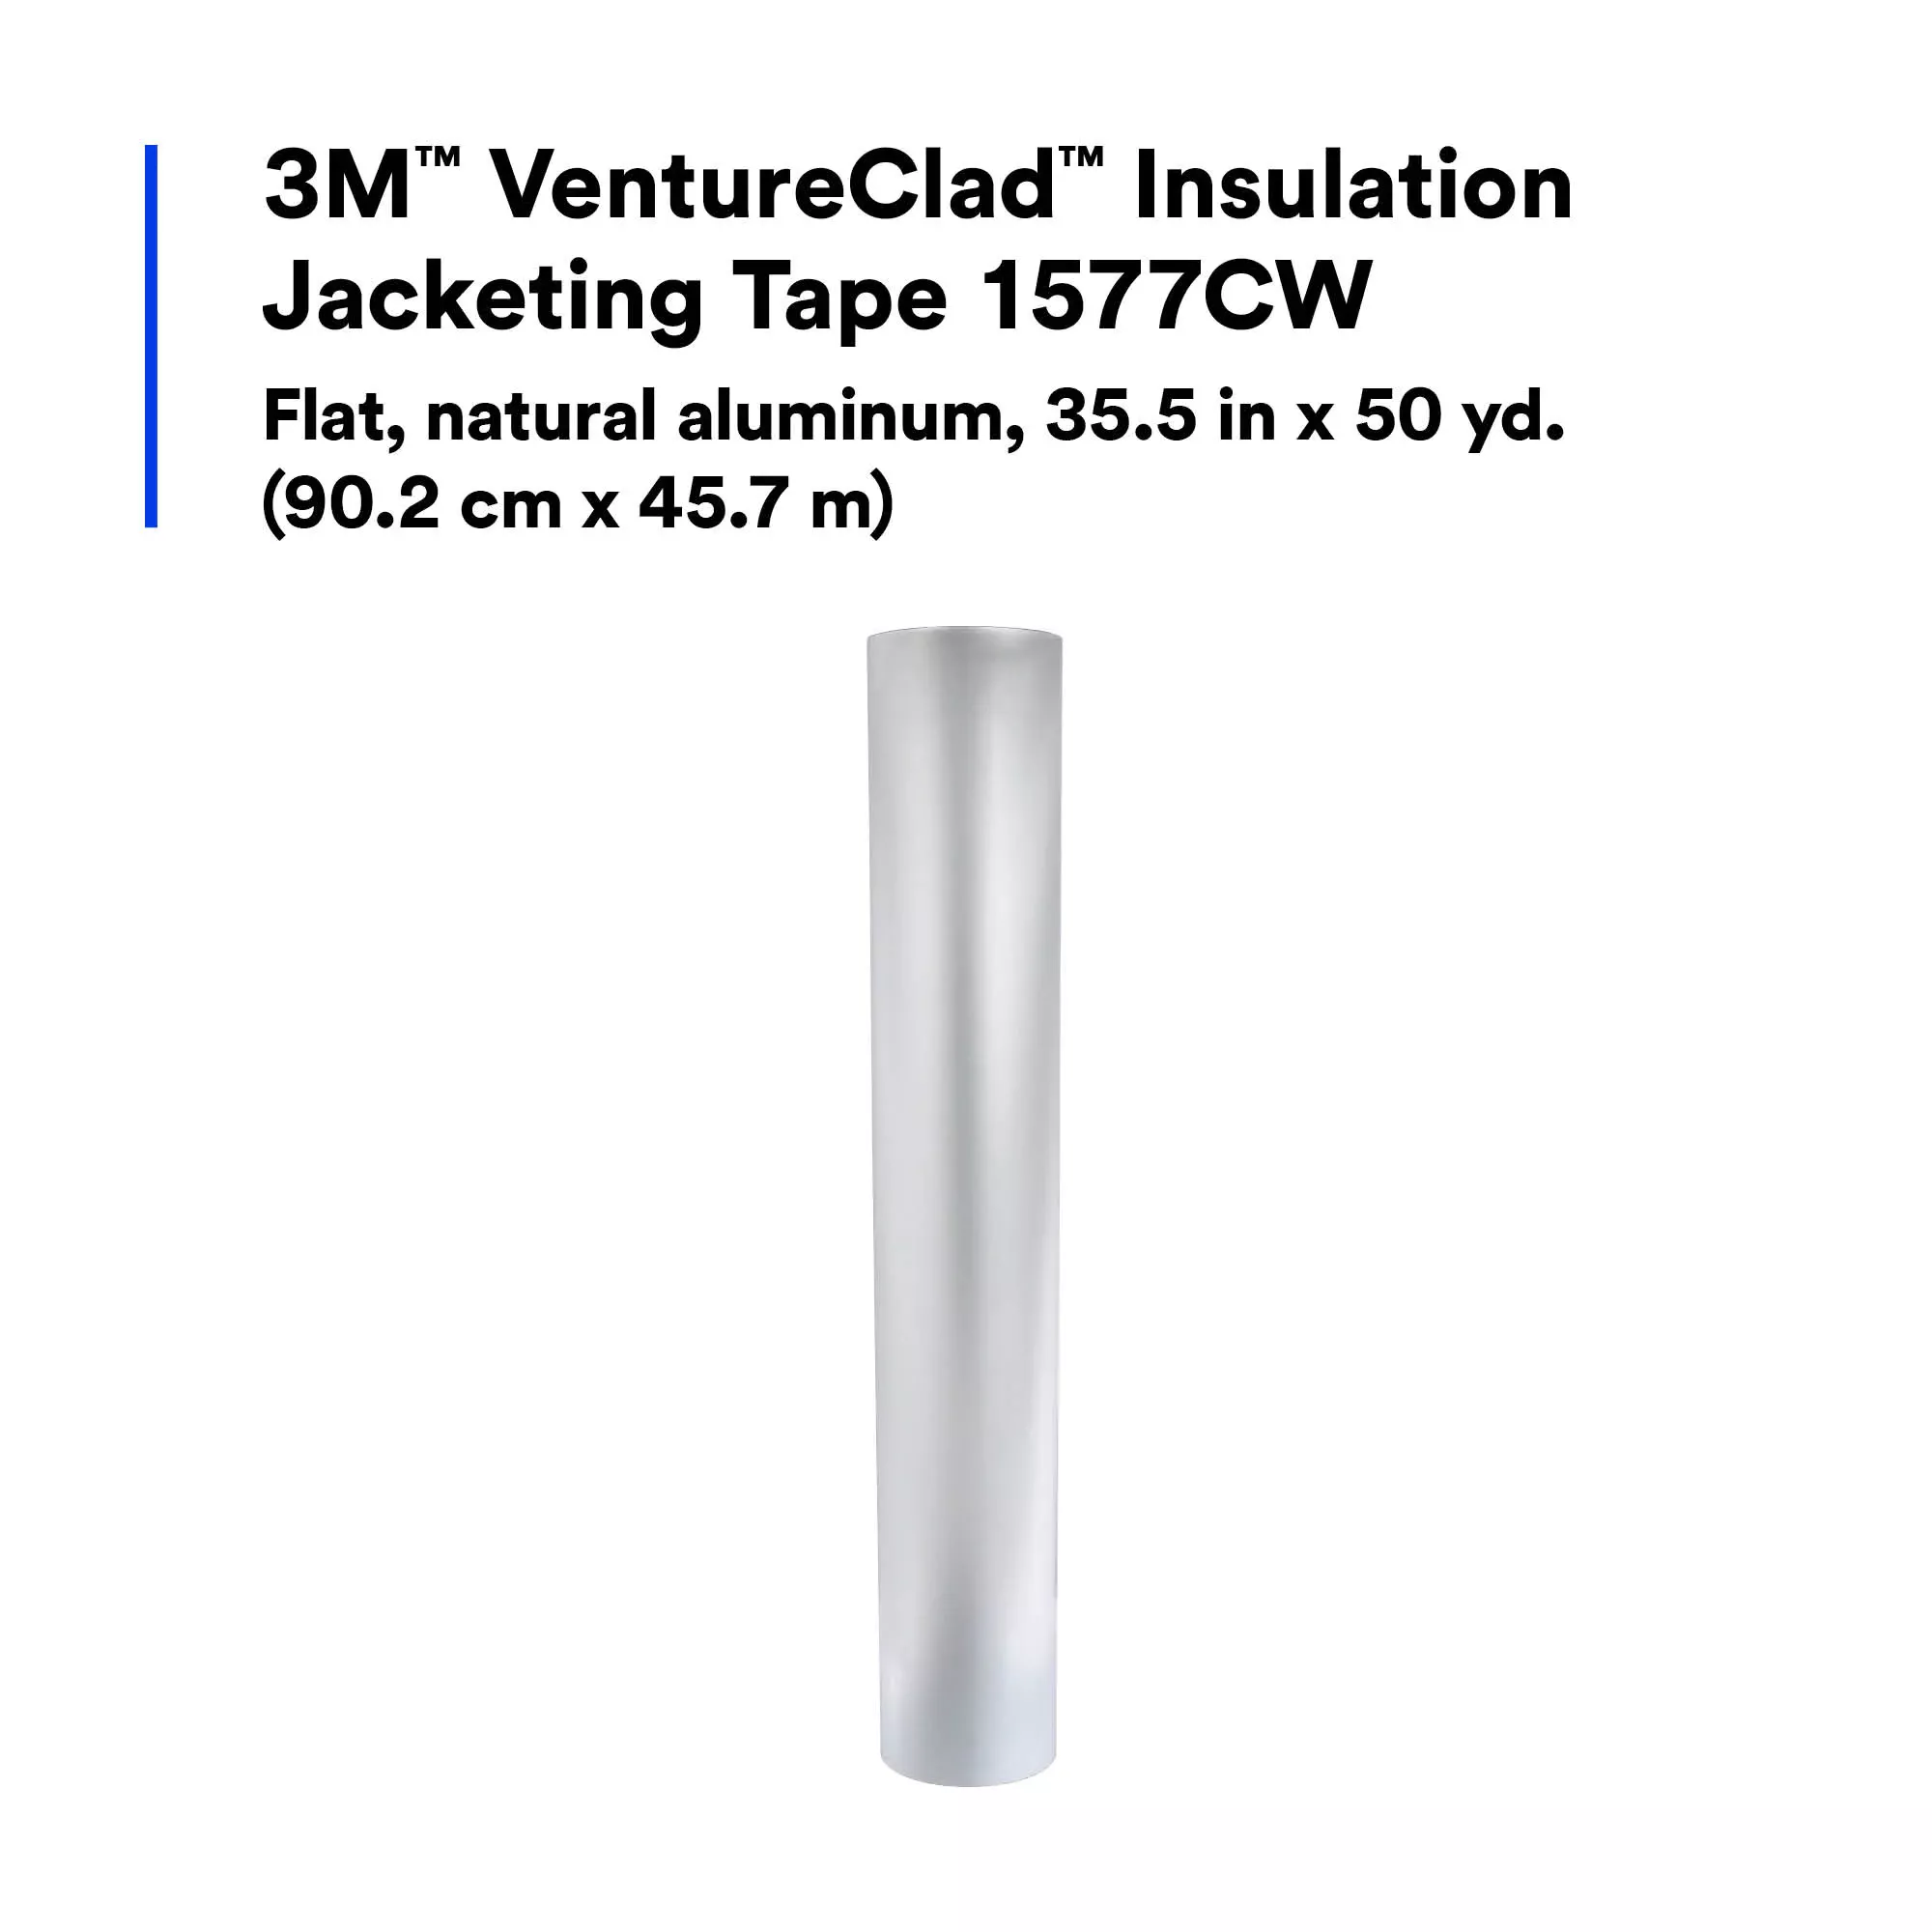 Product Number 1577CW | 3M™ VentureClad™ Insulation Jacketing Tape 1577CW